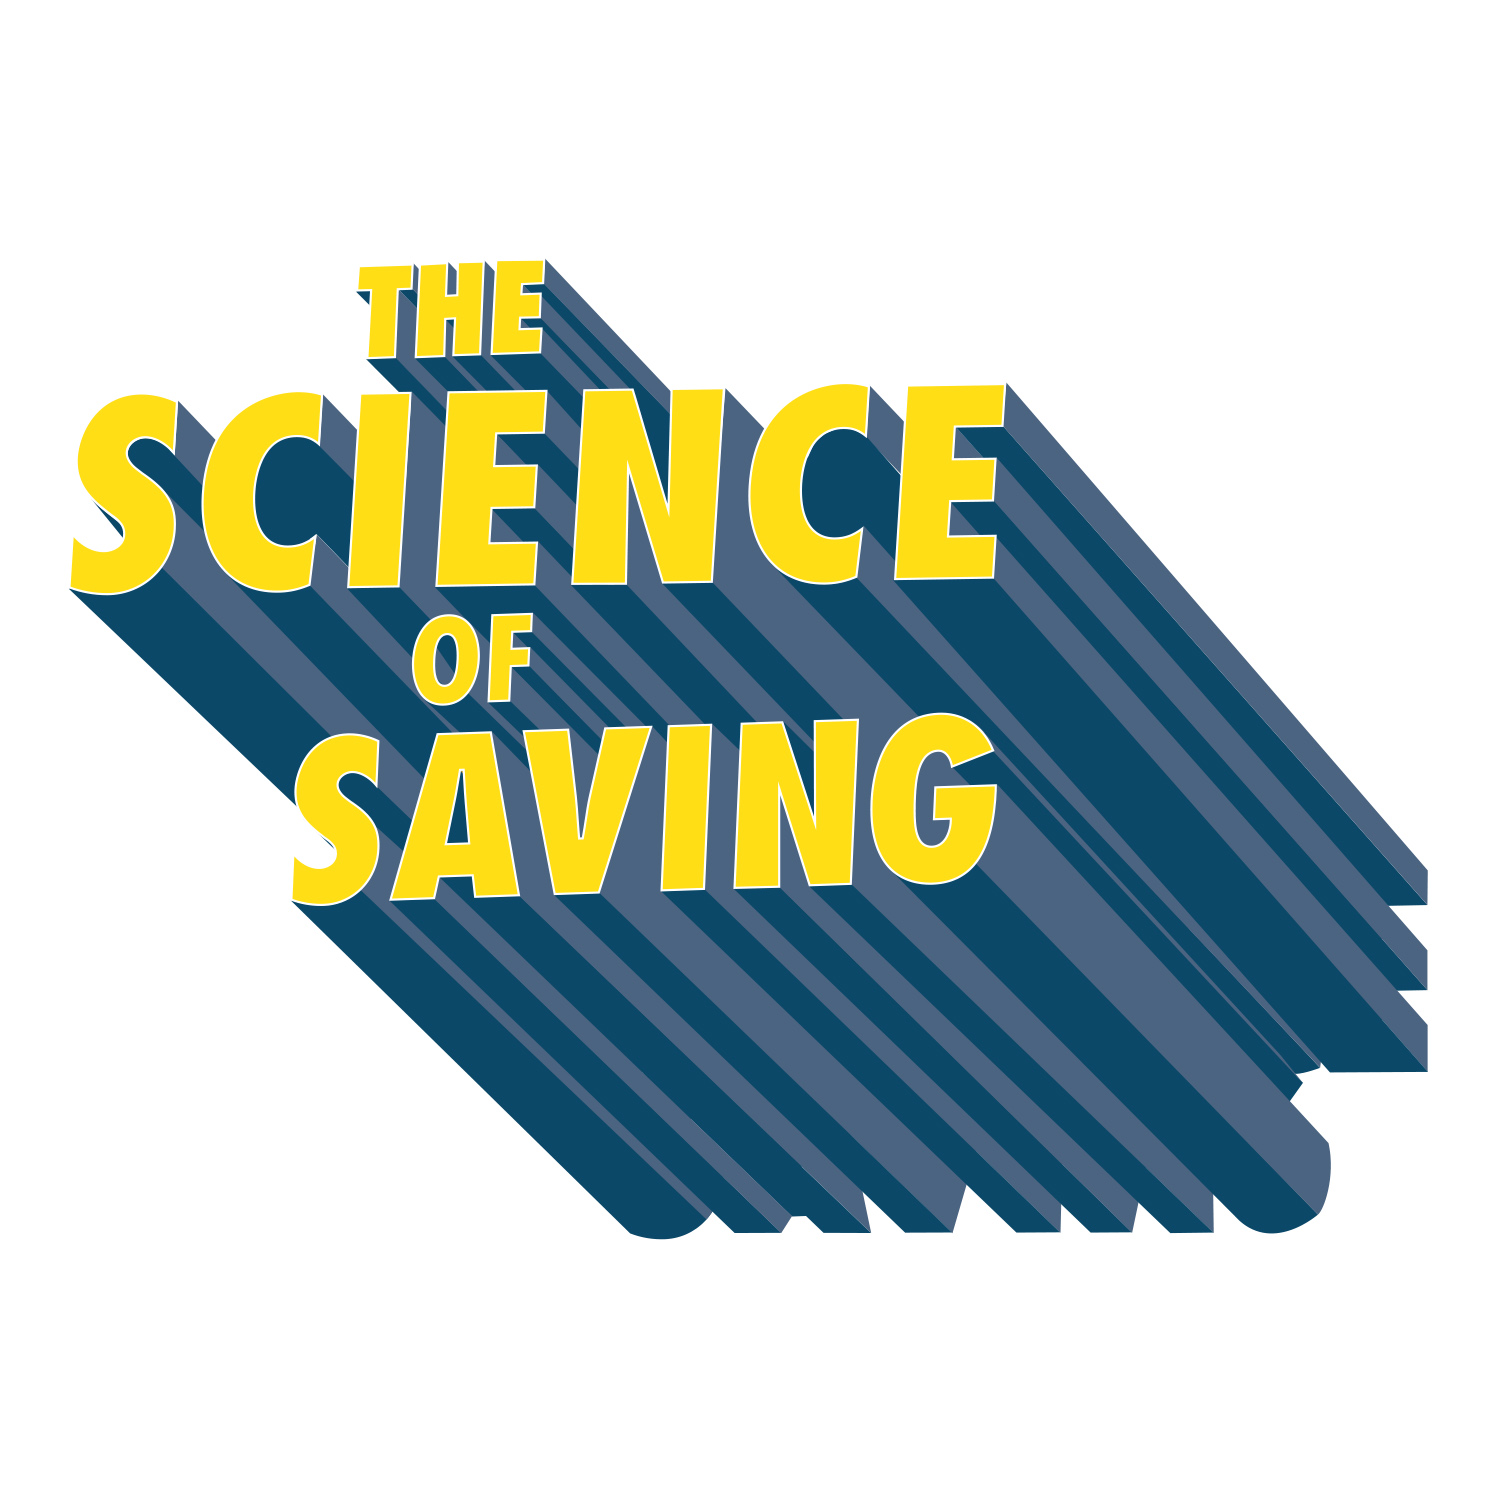 The Science of Saving